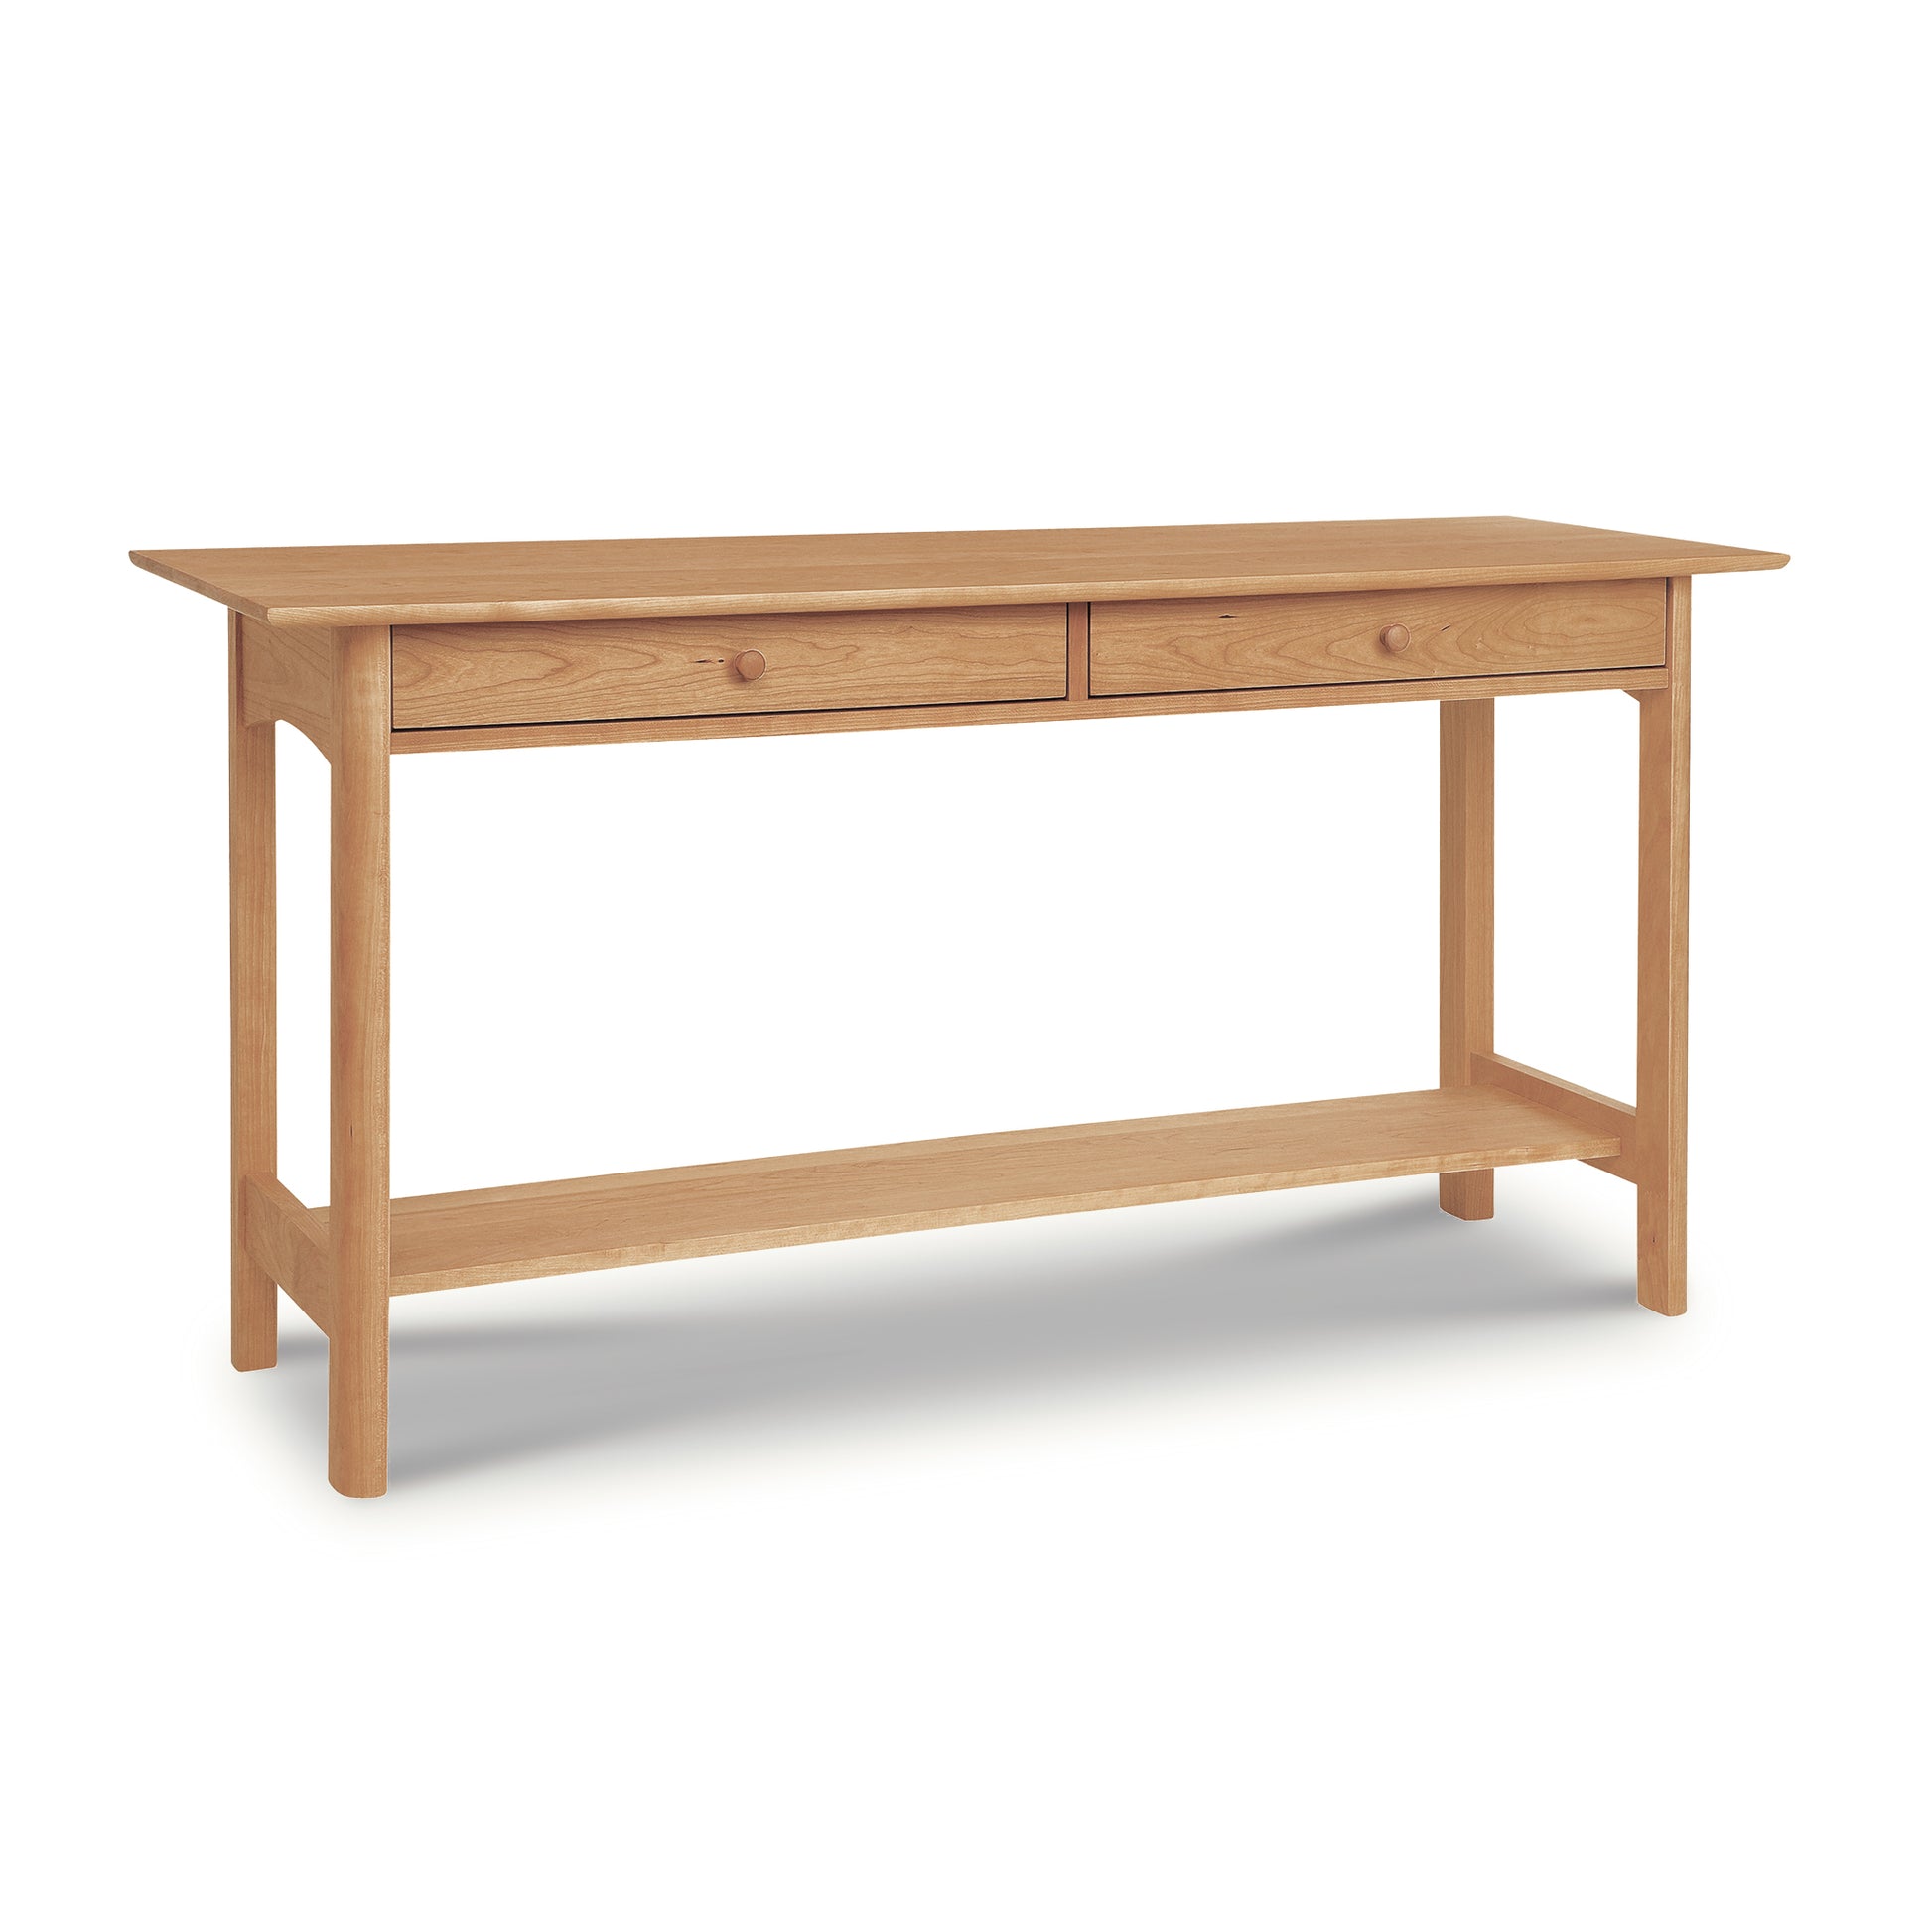 Heartwood Shaker 2-Drawer Console Table by Vermont Furniture Designs on a white background, featuring an eco-friendly oil finish.